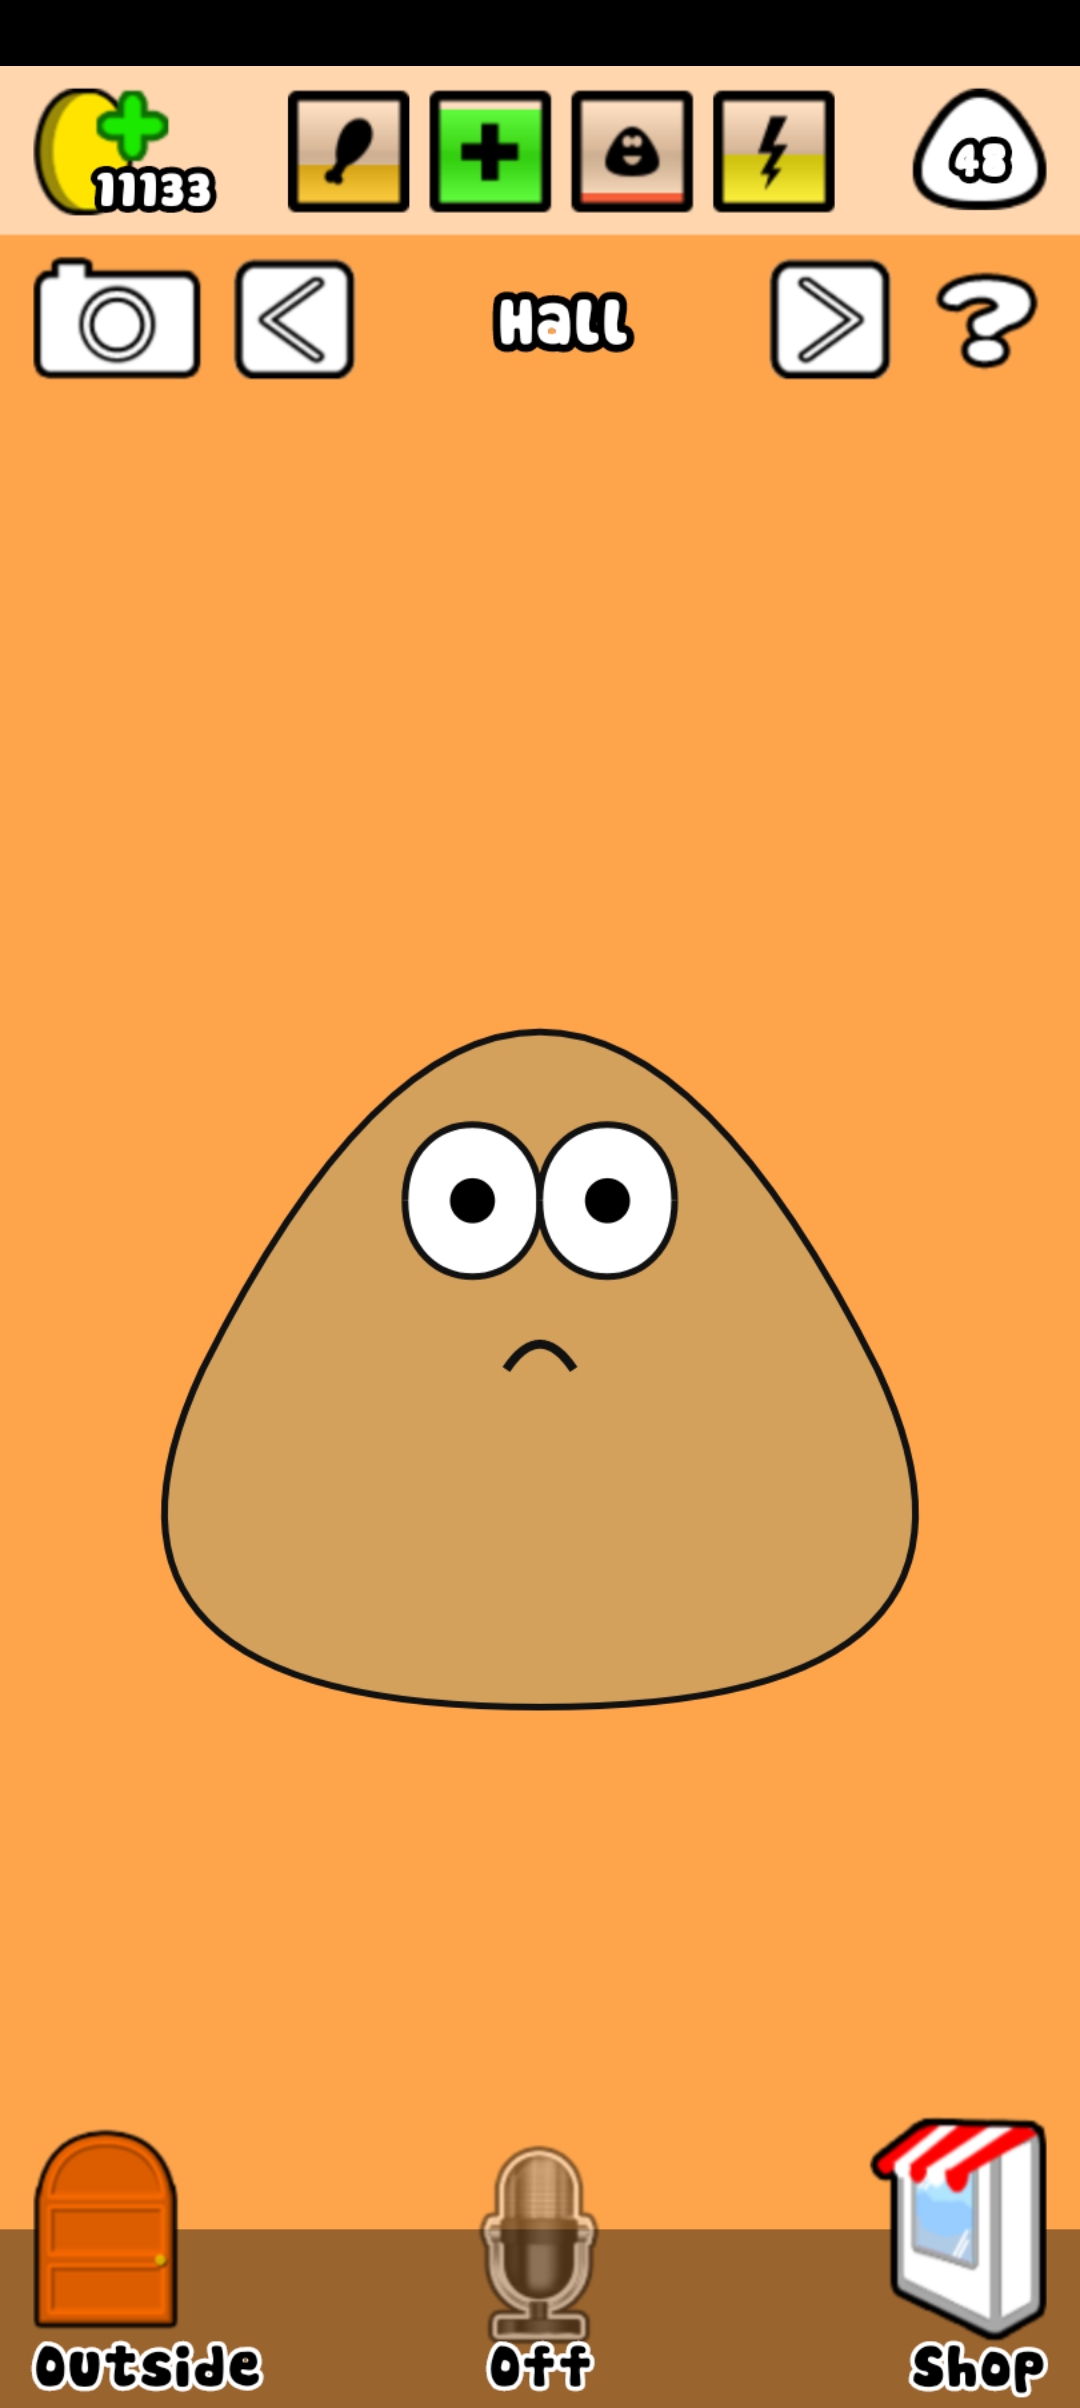 POU Game Tricks::Appstore for Android